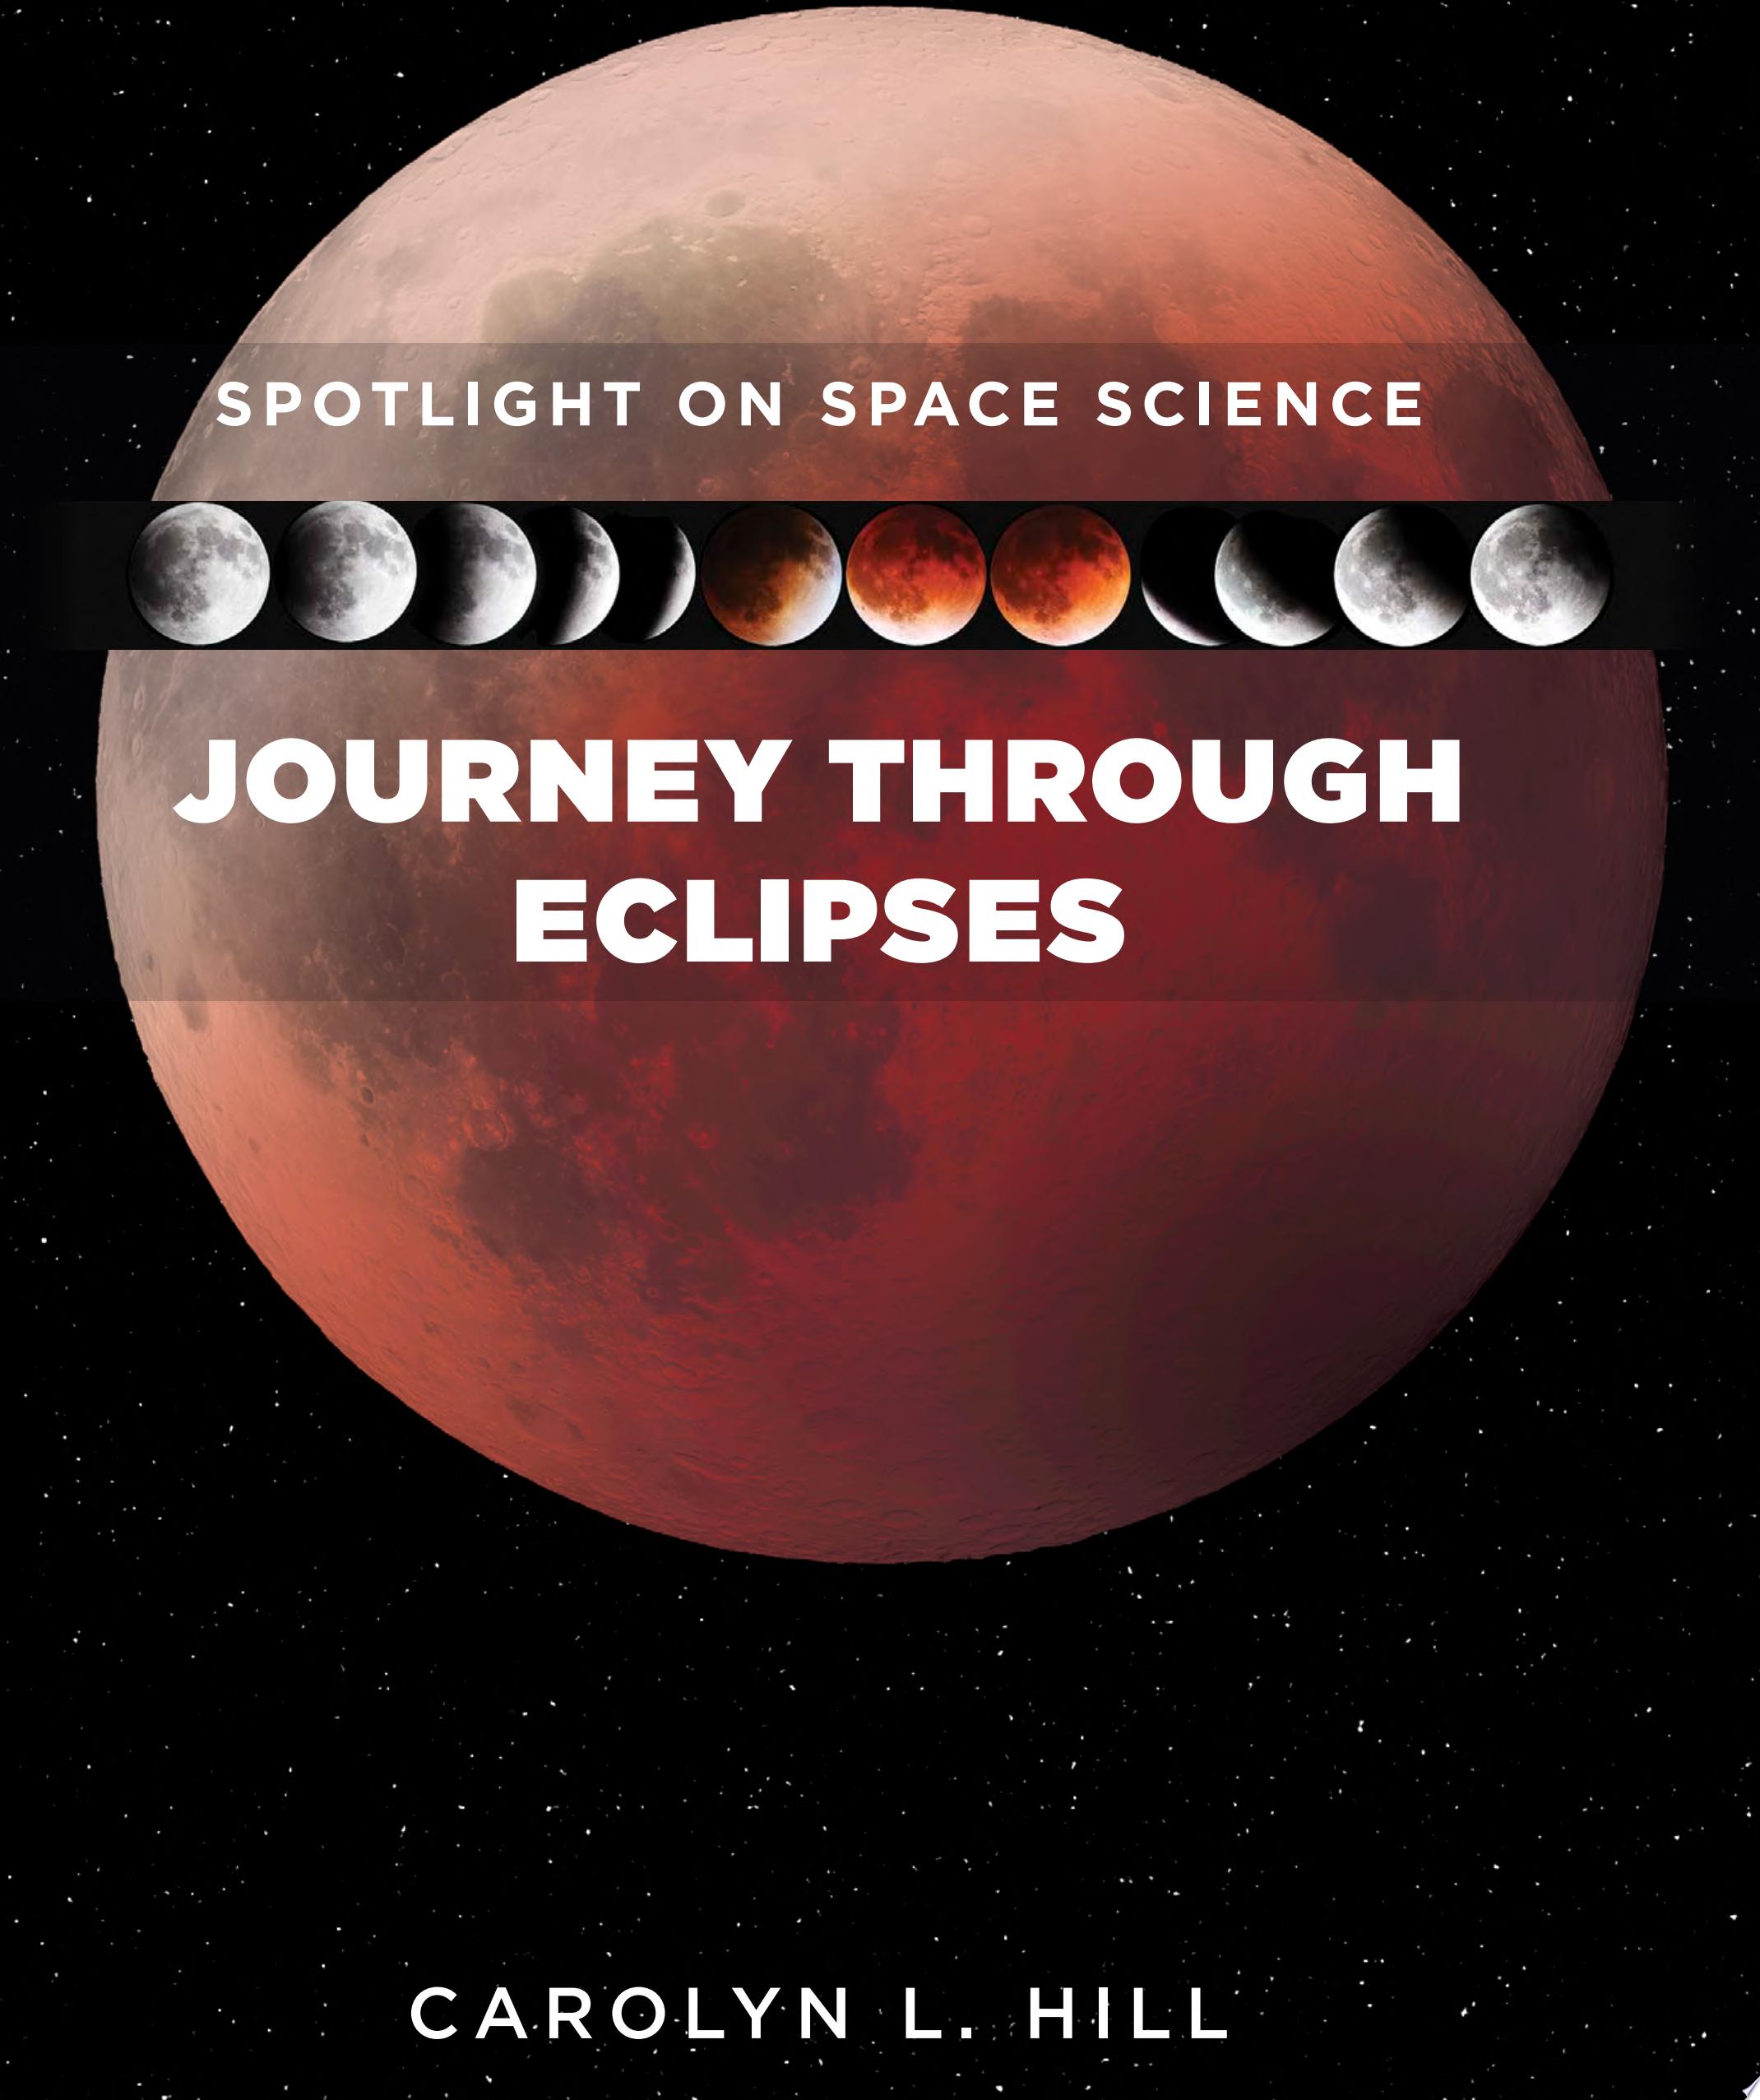 Image for "Journey Through Eclipses"